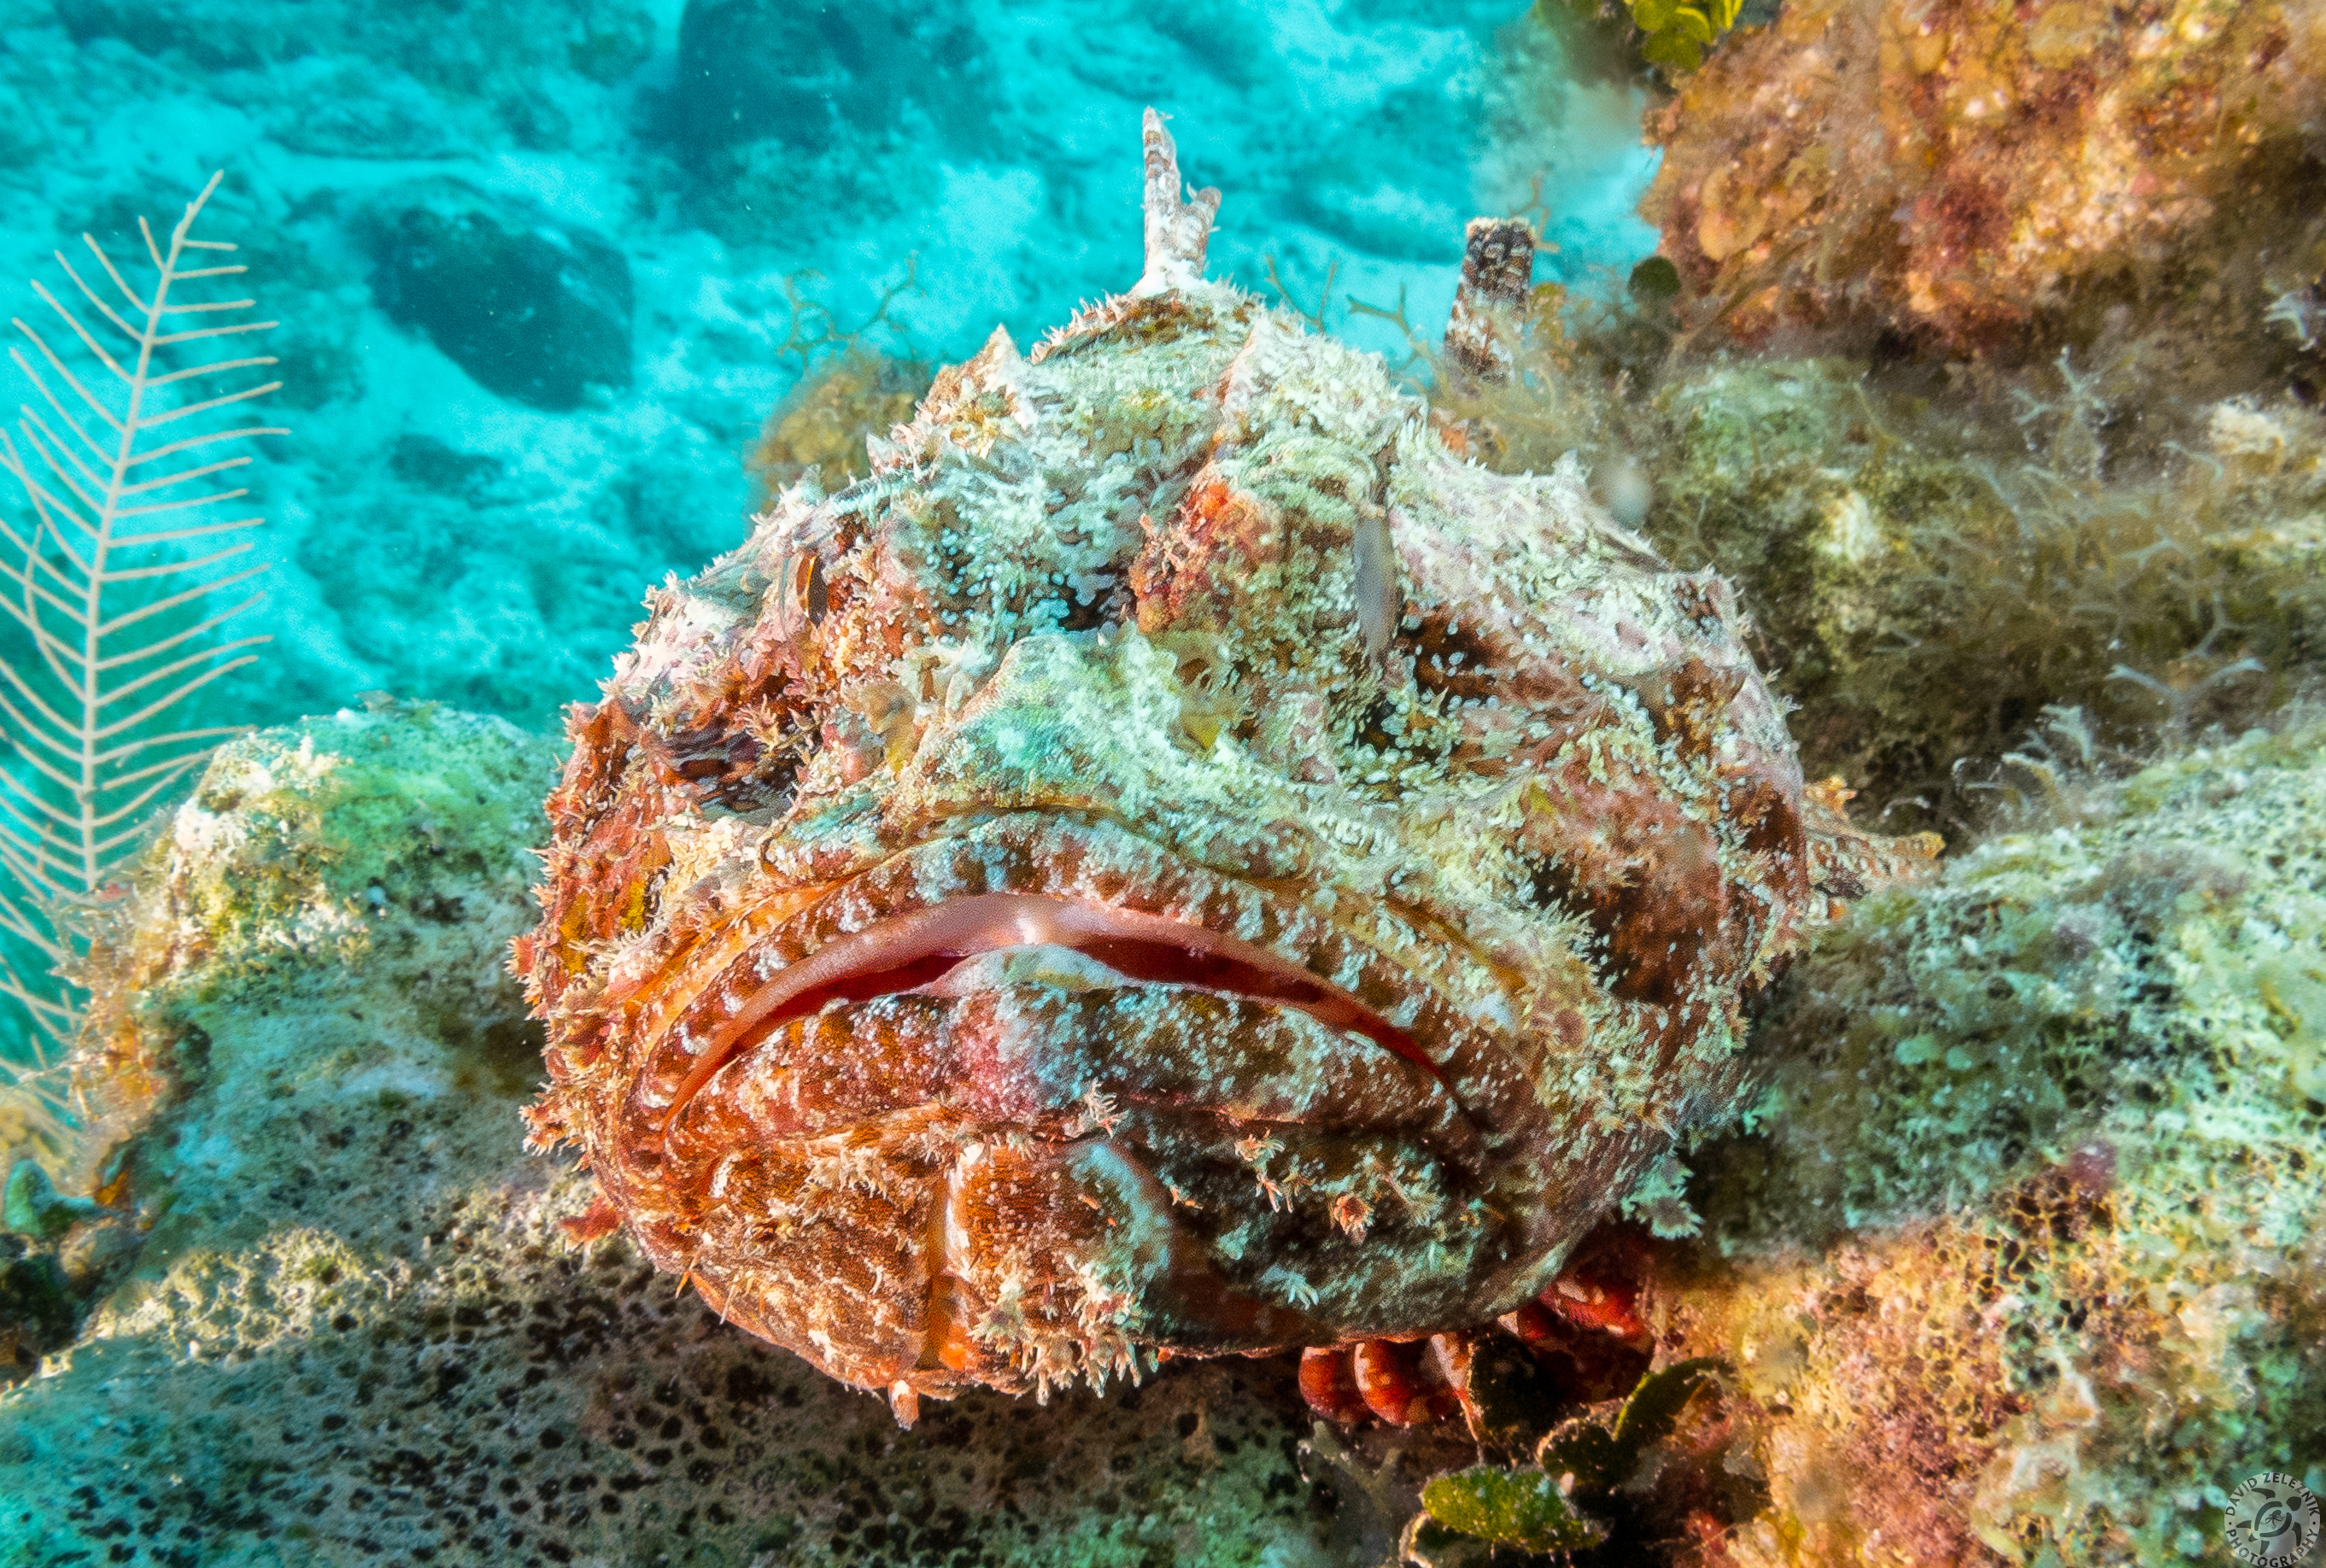 Spotted Scorpionfish thinking about lunch perhaps